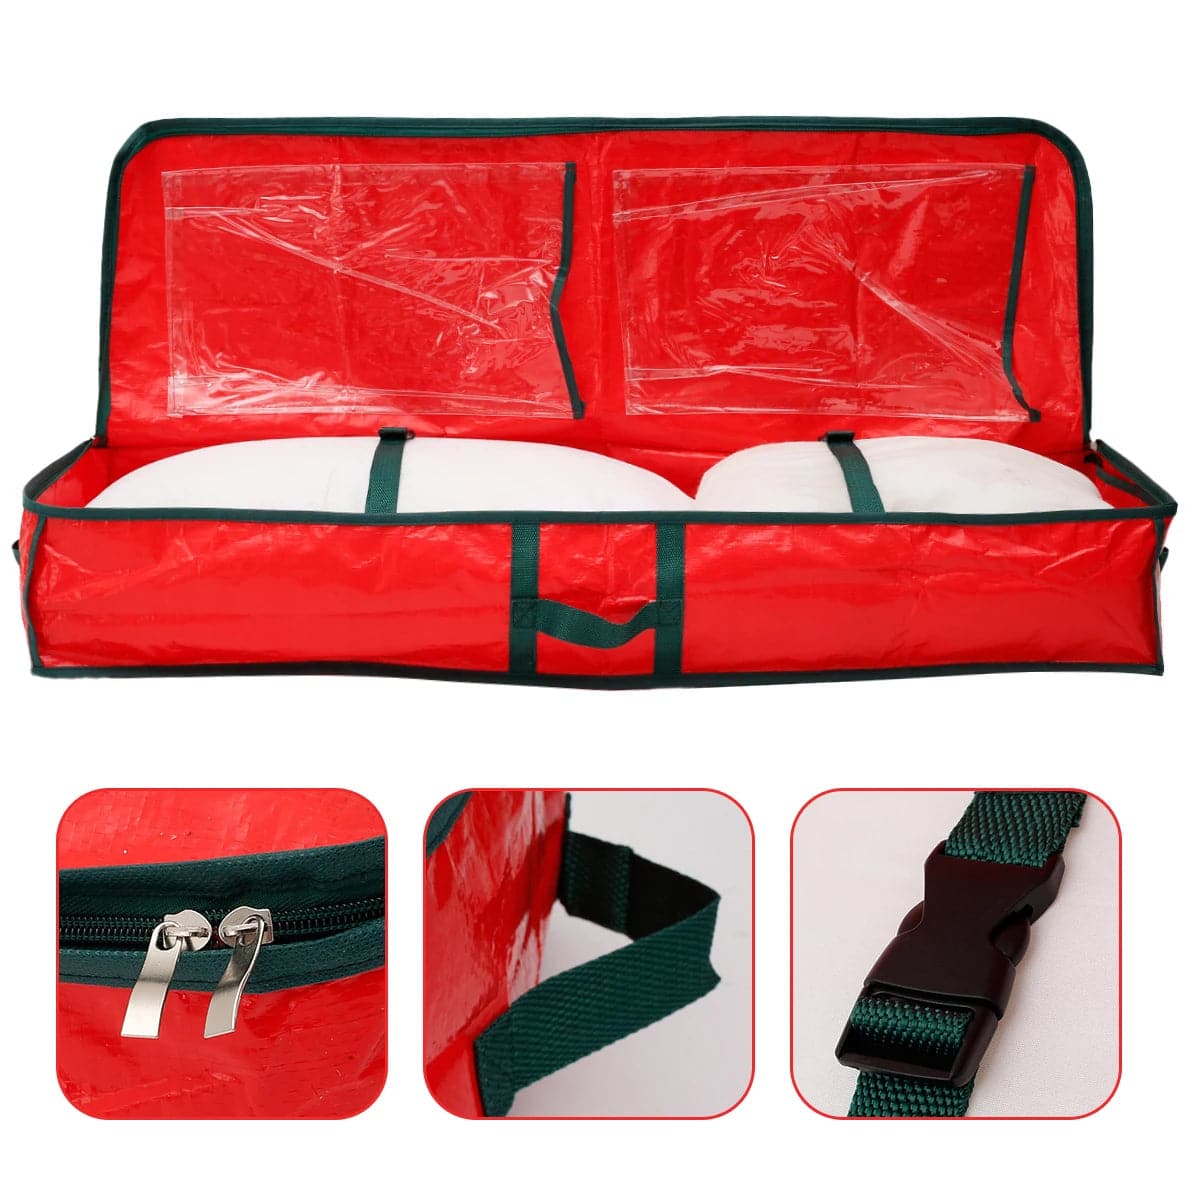 Christmas Gift Wrap Storage Bag Waterproof Underbed Storage Organizer with Reinforced Handles Xmas Wrapping Paper Storage Box